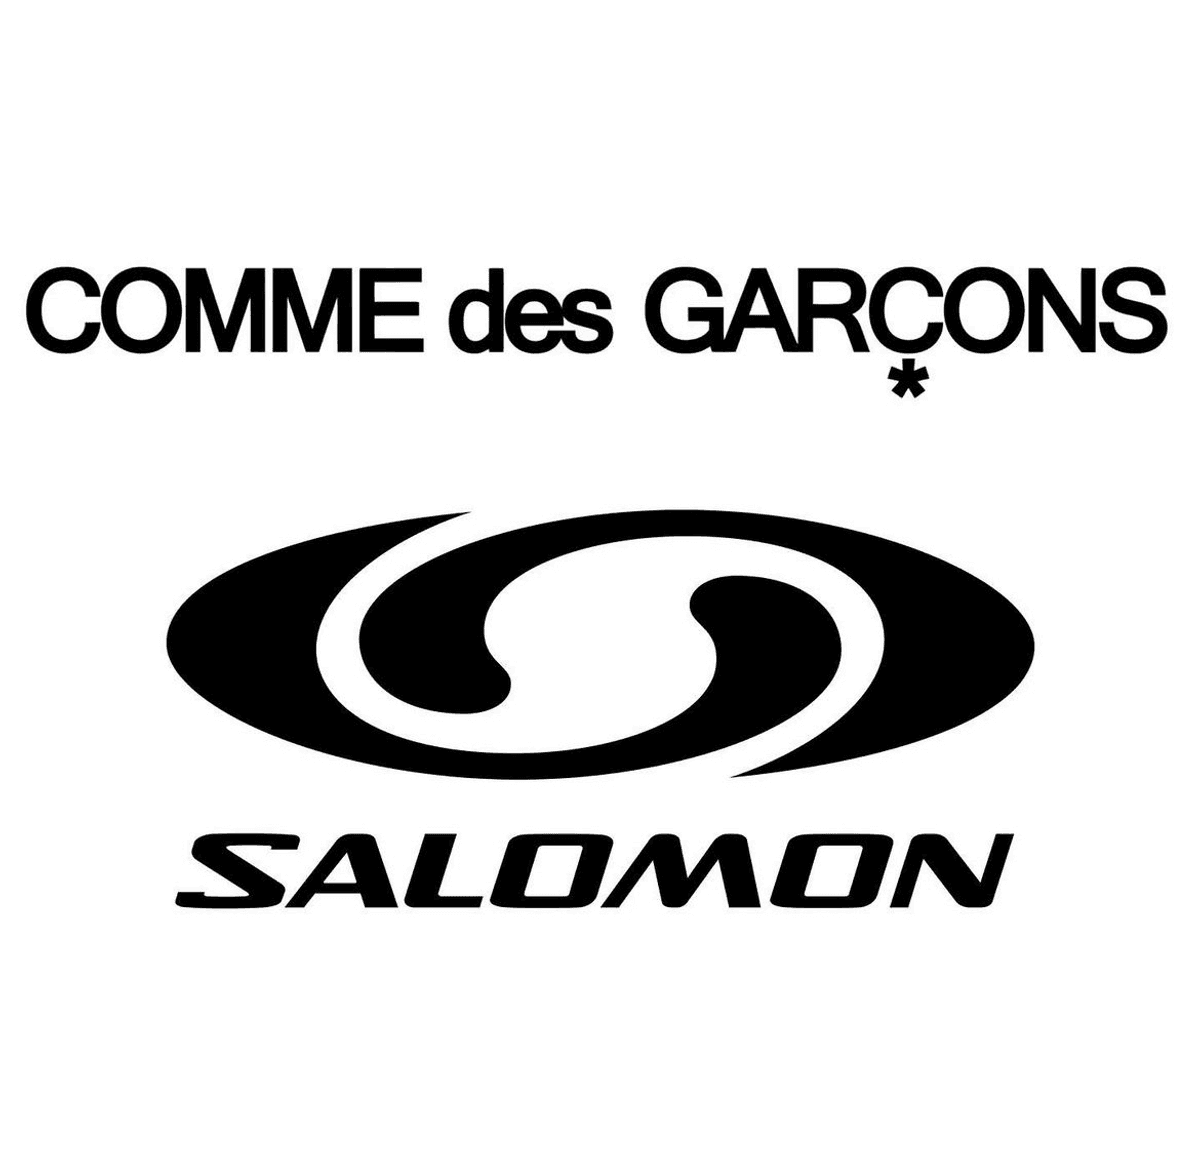 Salomon And COMME Des GARÇONS Are Joining Forces In The FW23 Season